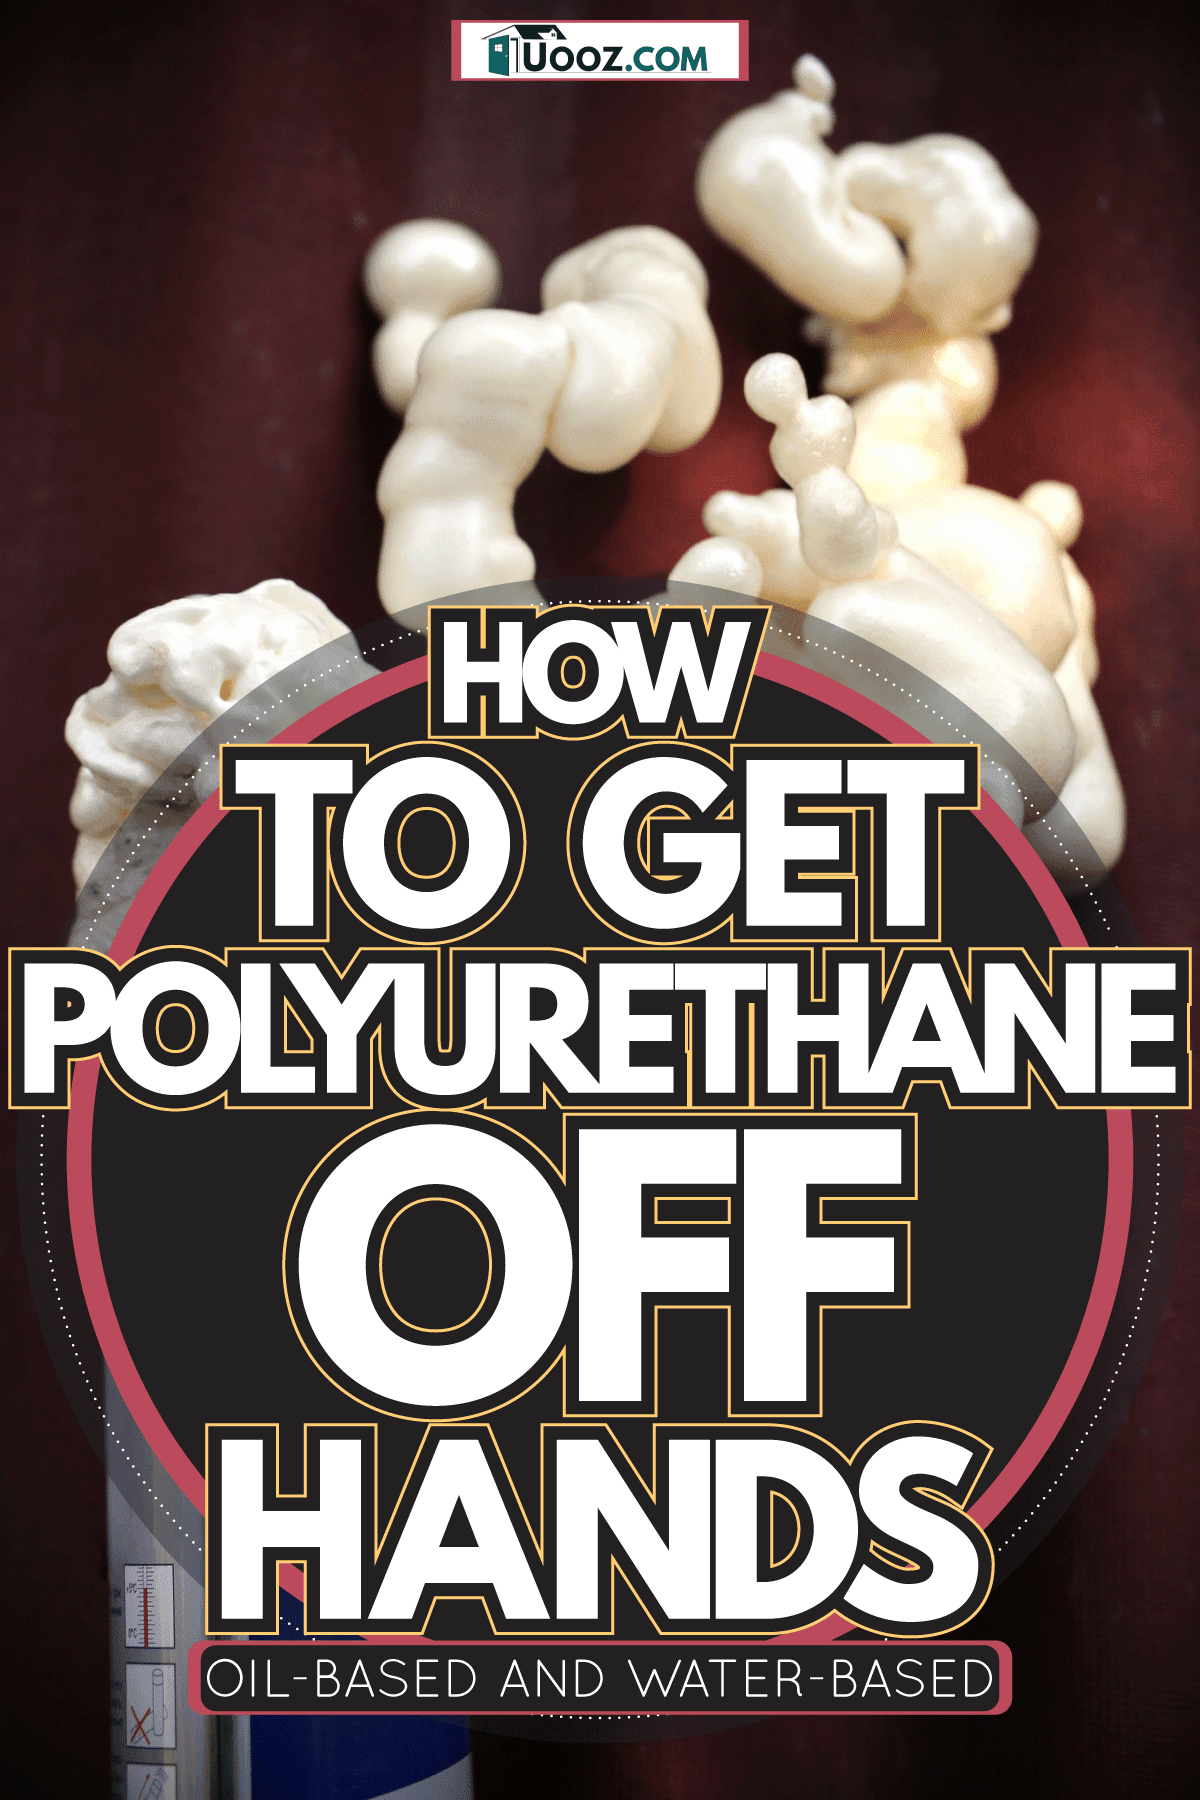 Foam polyurethane coming from a can, How To Get Polyurethane Off Hands - Oil-Based And Water- Based